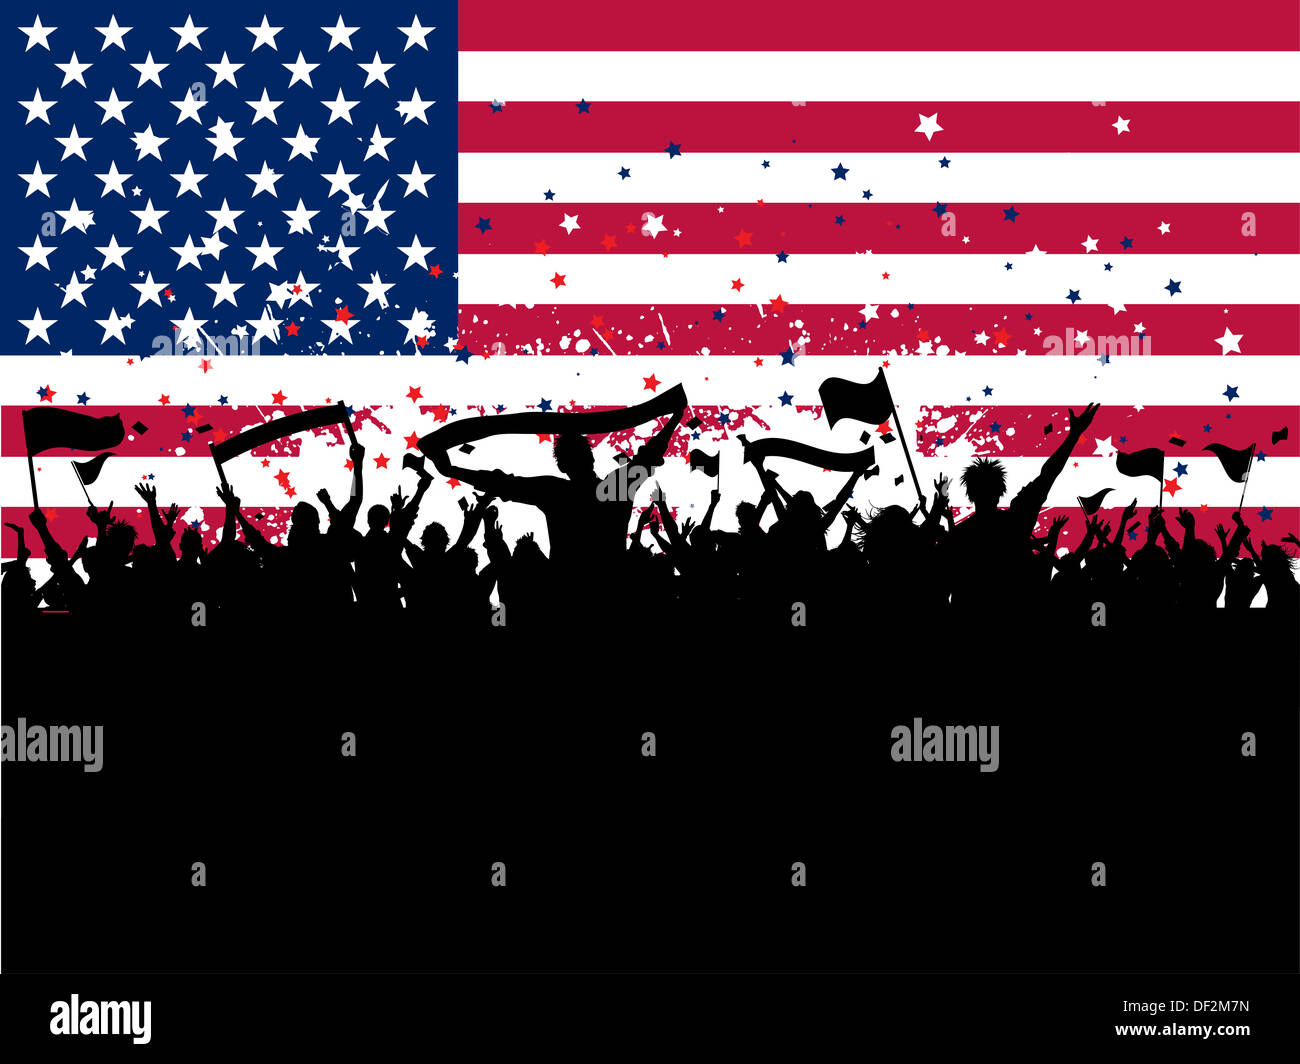 Silhouette of a party crowd with banners and flags on an American flag background Stock Photo